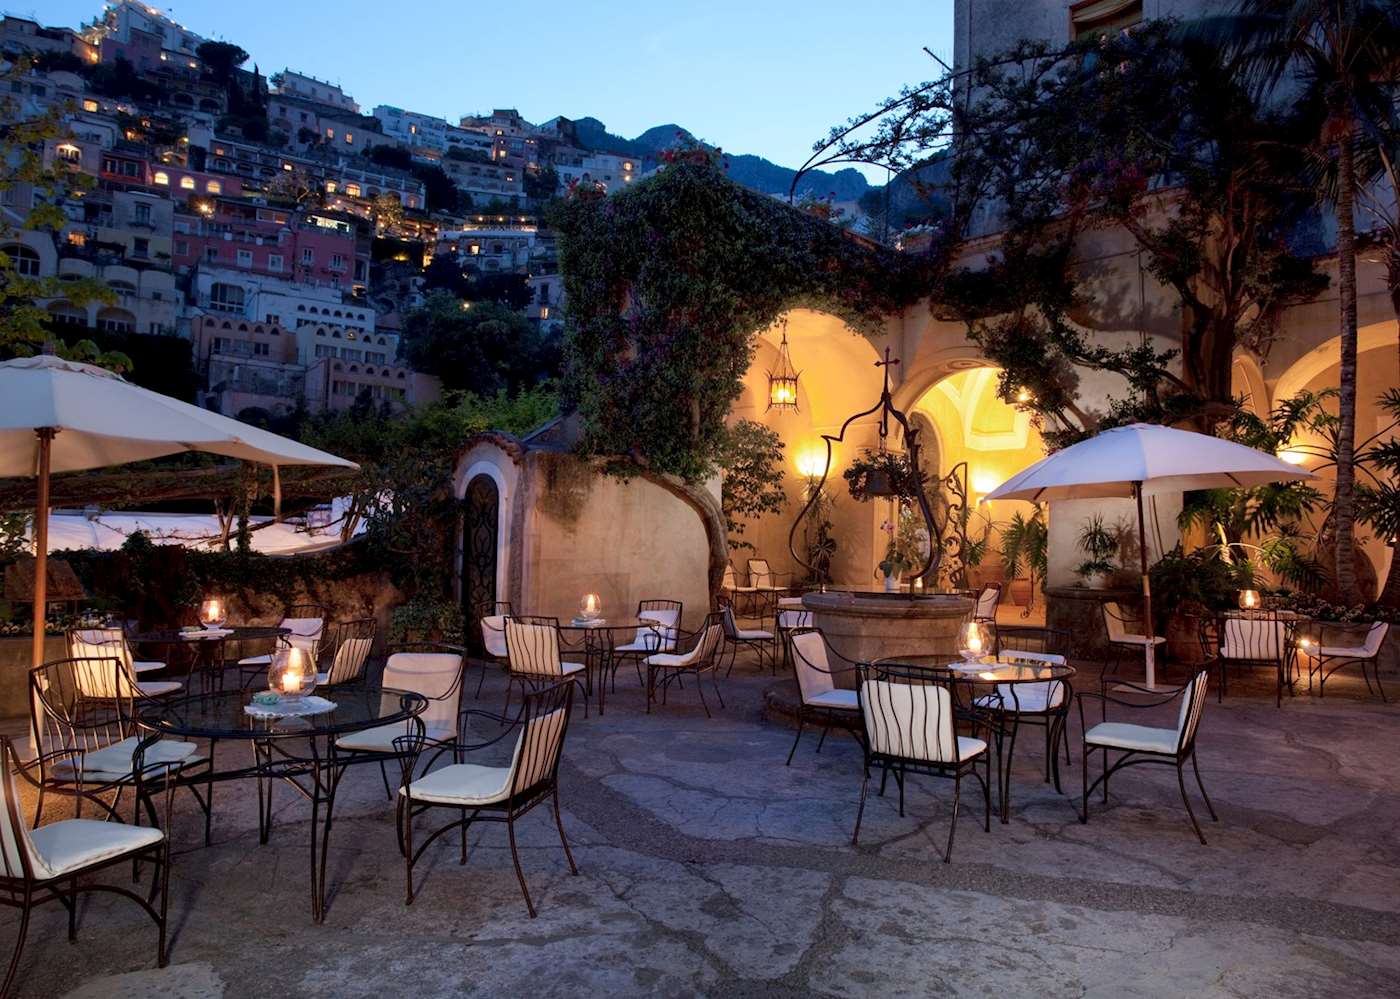 Palazzo Murat | Hotels in The Amalfi Coast | Audley Travel US